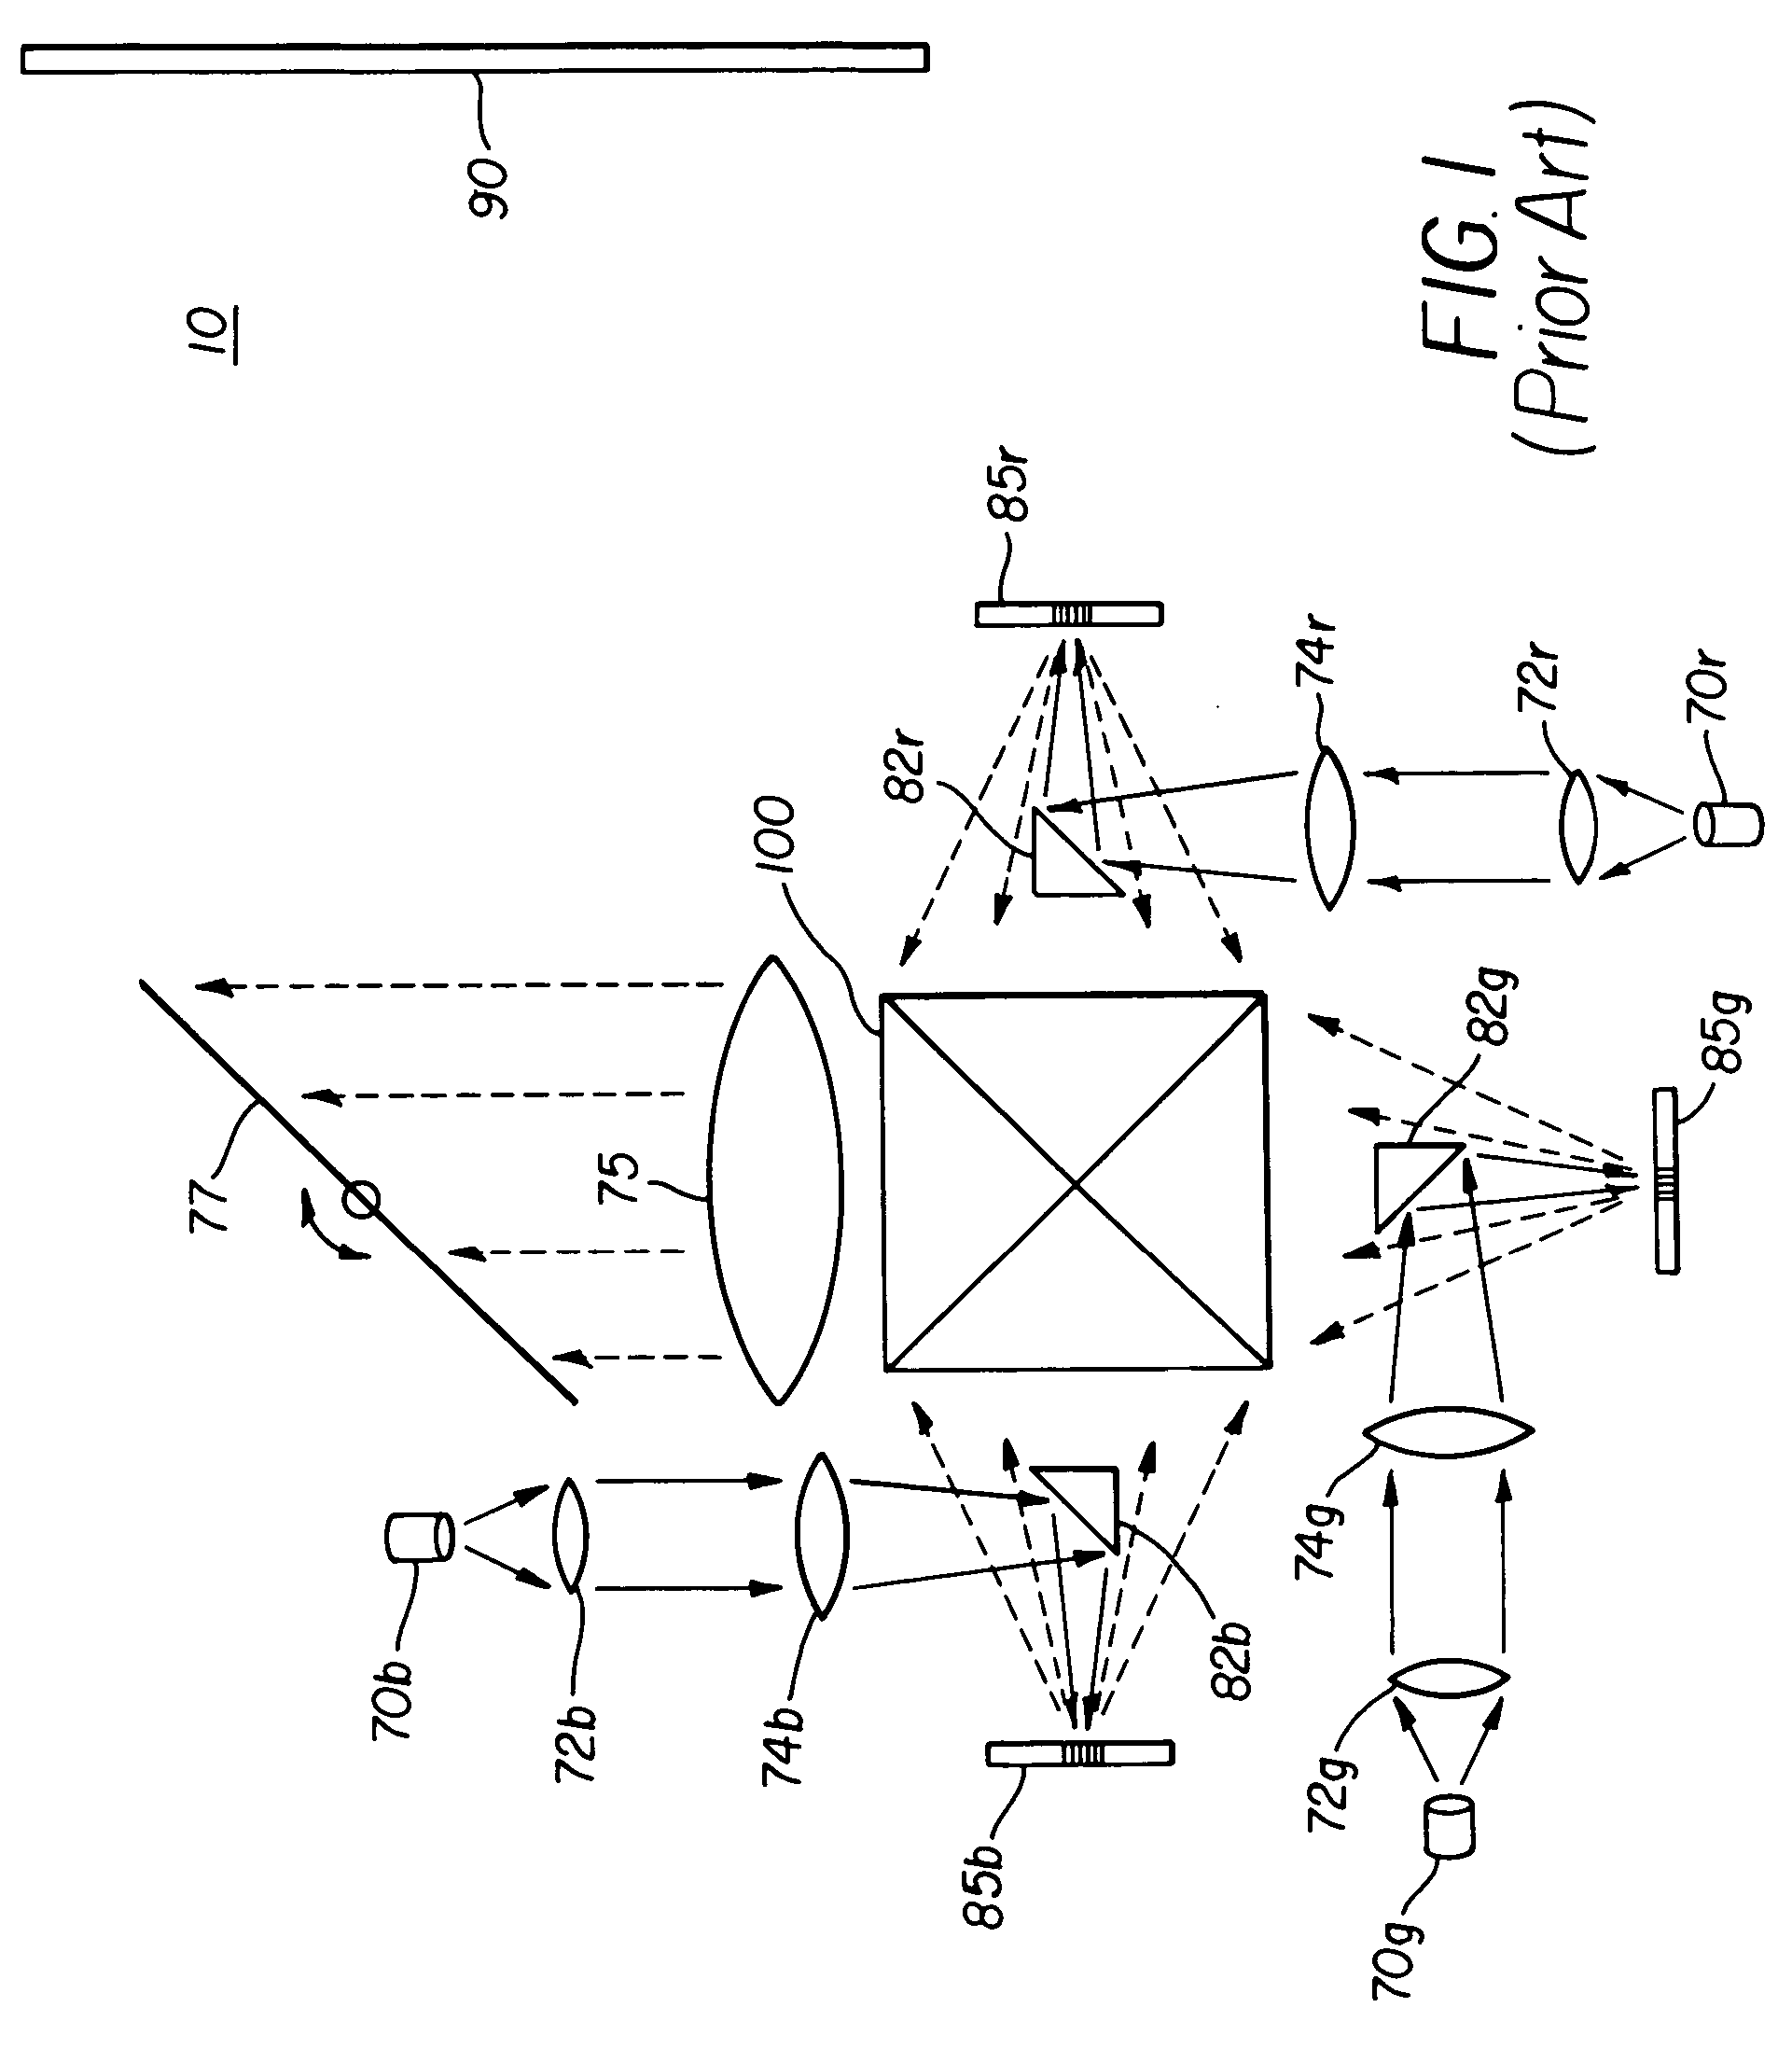 Display system incorporating trilinear electromechanical grating device